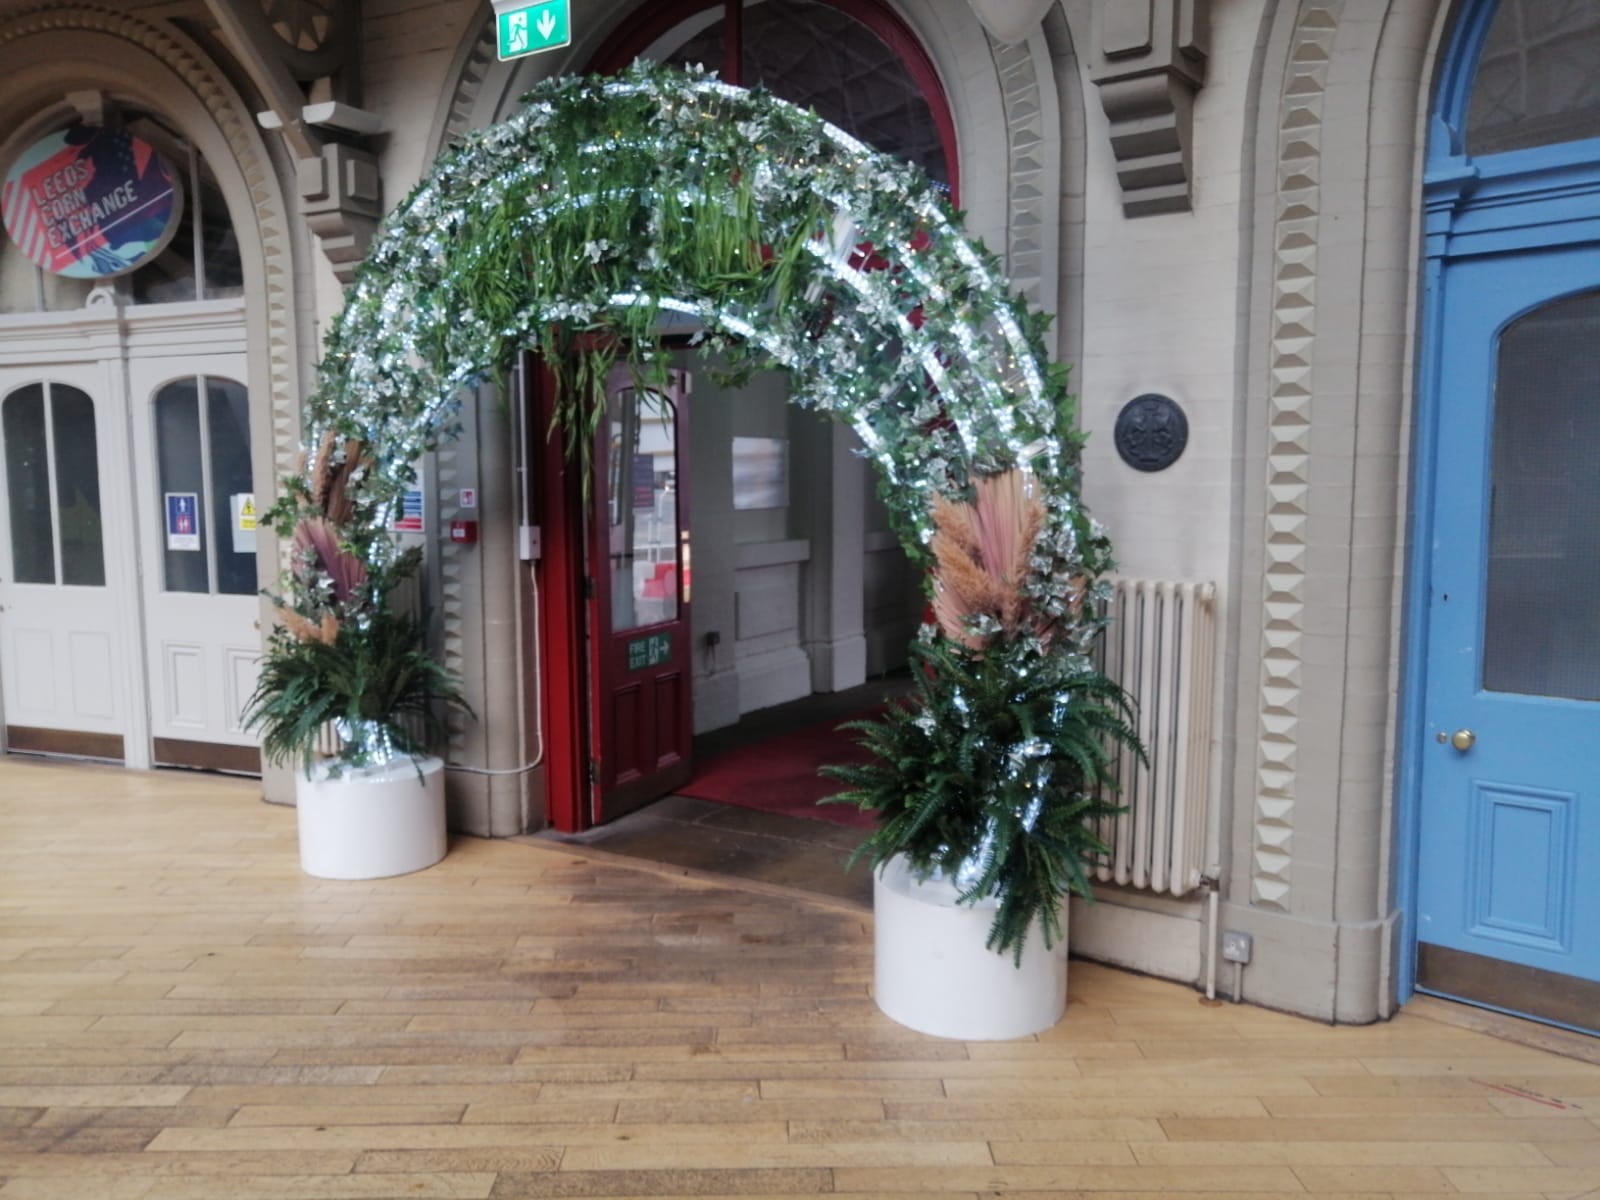 Light up greenery arch displayed outside a doorway entrance in Leeds corn exchange shopping centre.